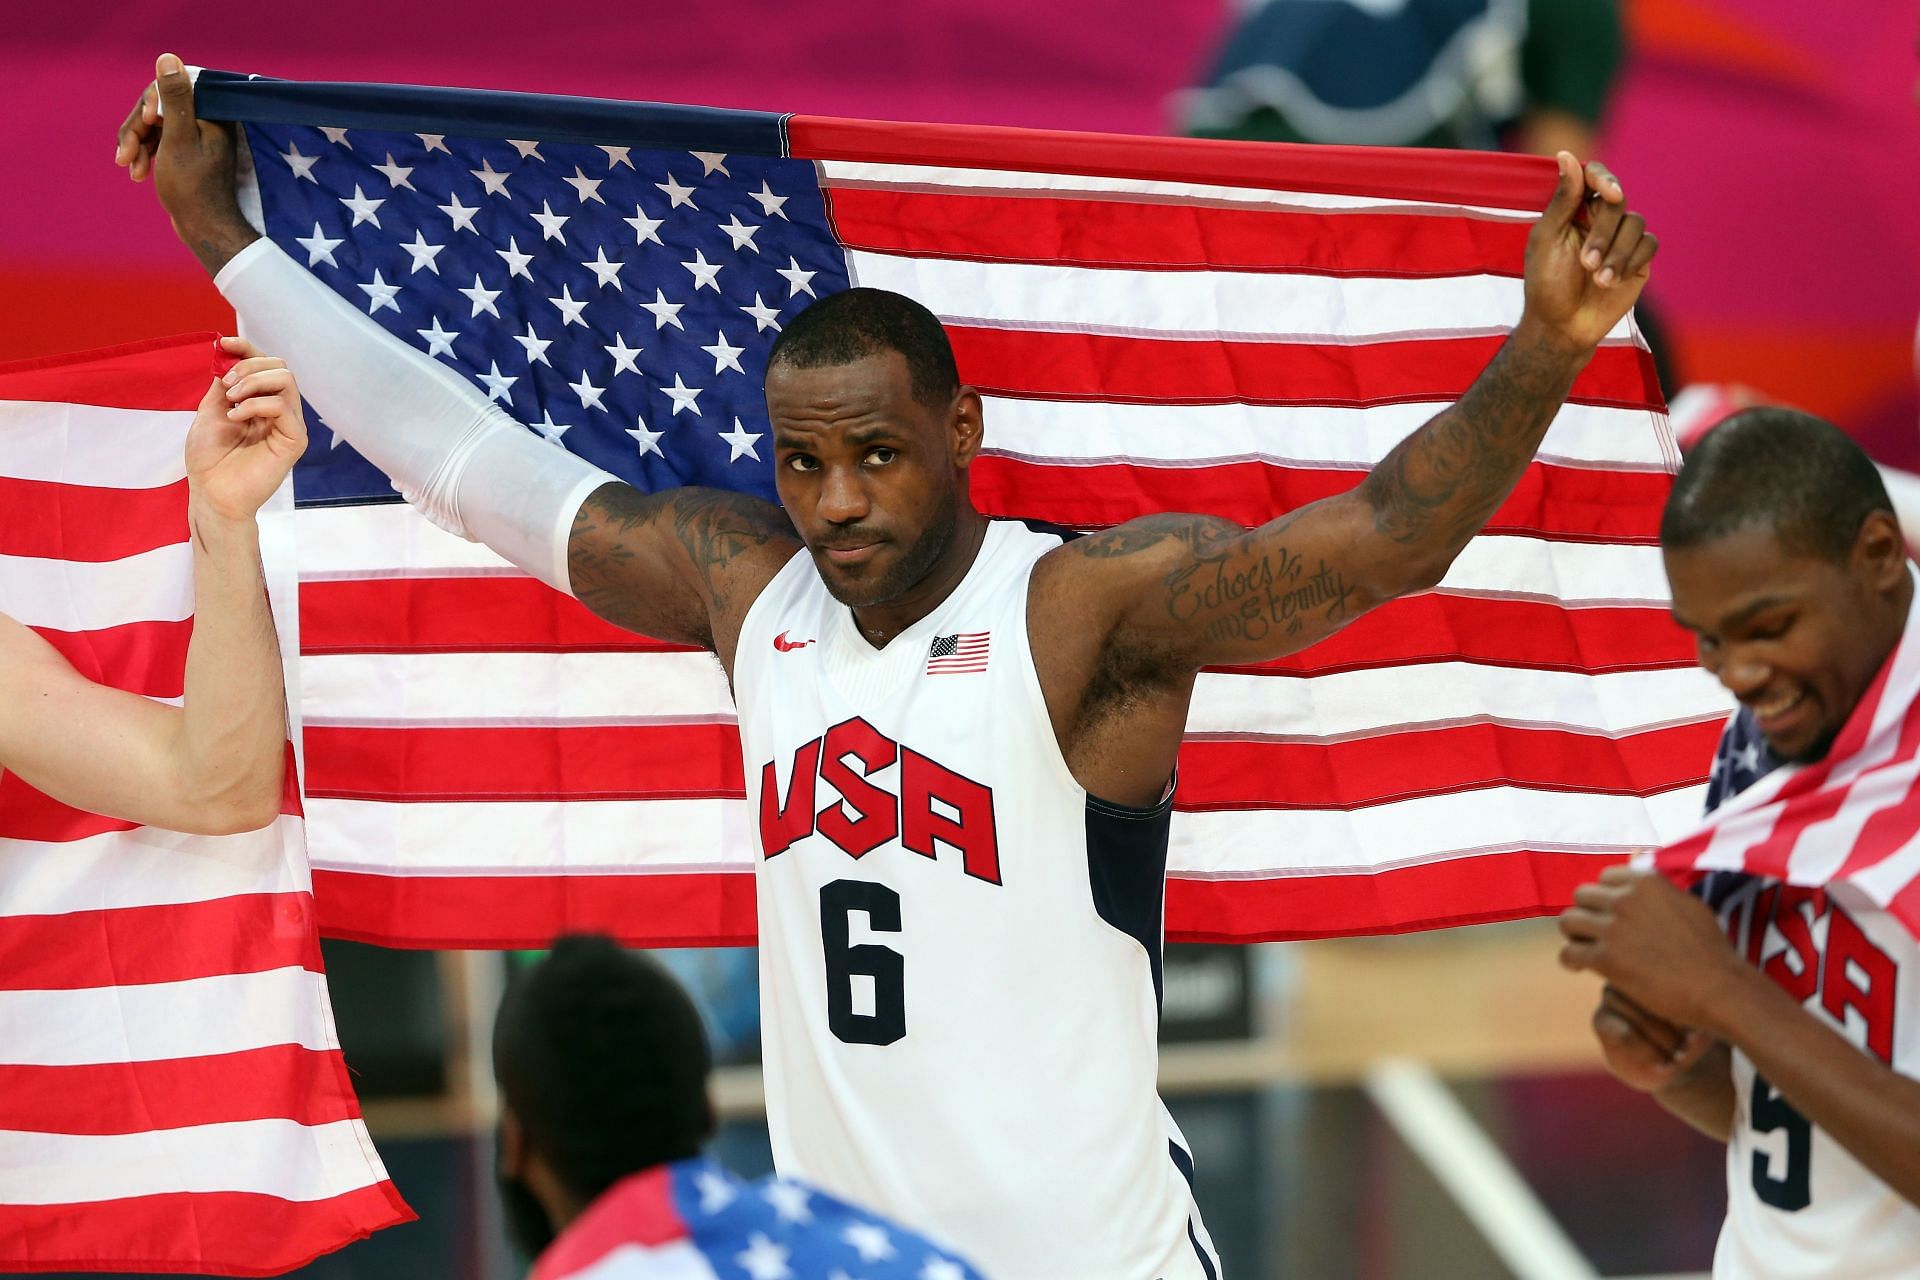 The LeBron James award collection includes two Olympic Gold medals (Image via Getty Images)